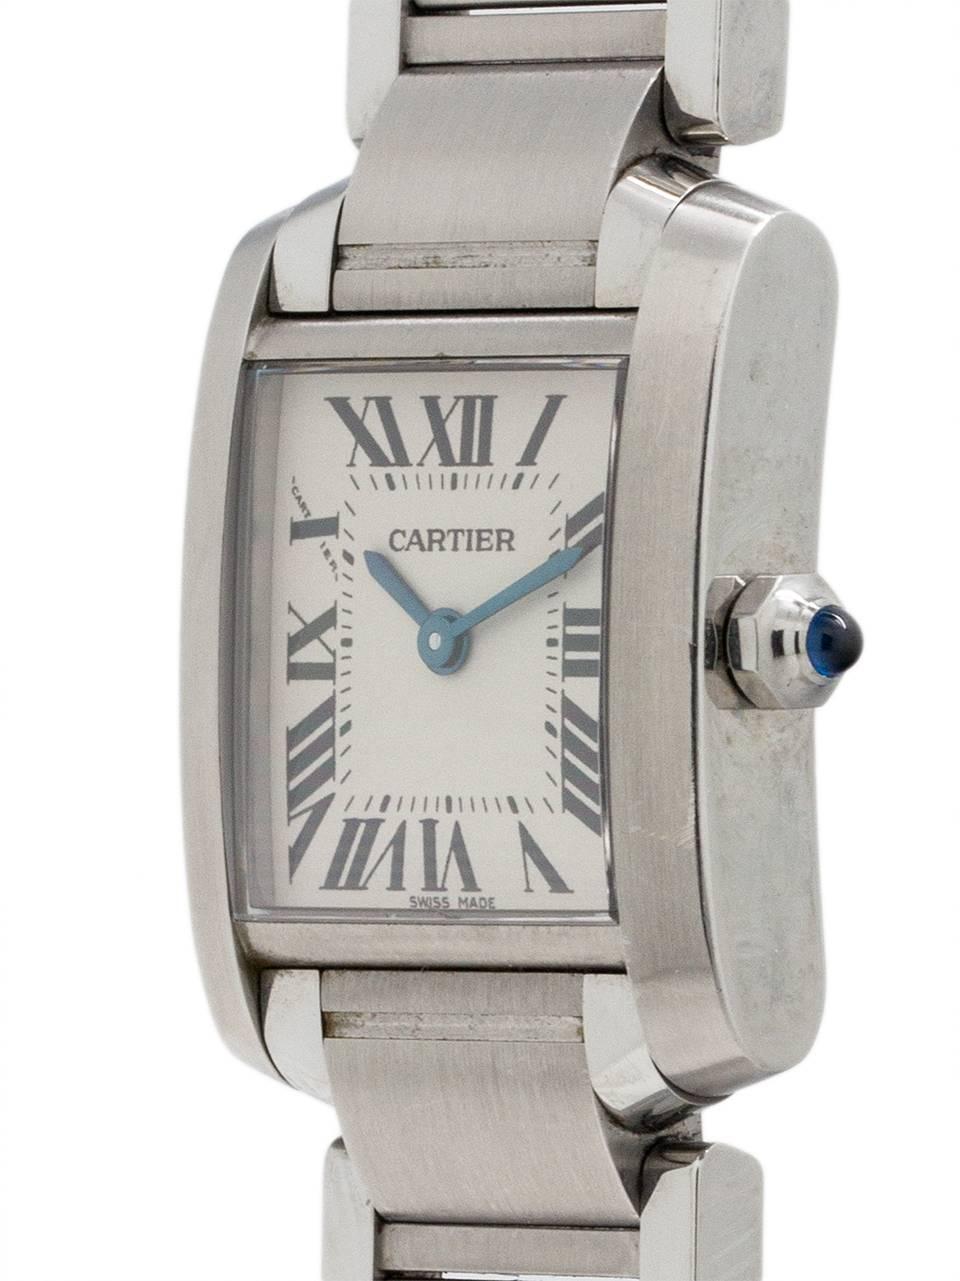 
Cartier Stainless Steel Lady Tank Francaise ref 2384 serial 783329UF circa 2000's. 20 X 25mm case with sapphire crystal and blue sapphire cabochon crown. Classic antique white dial with Roman numerals and blue steel hands. Powered by battery quartz